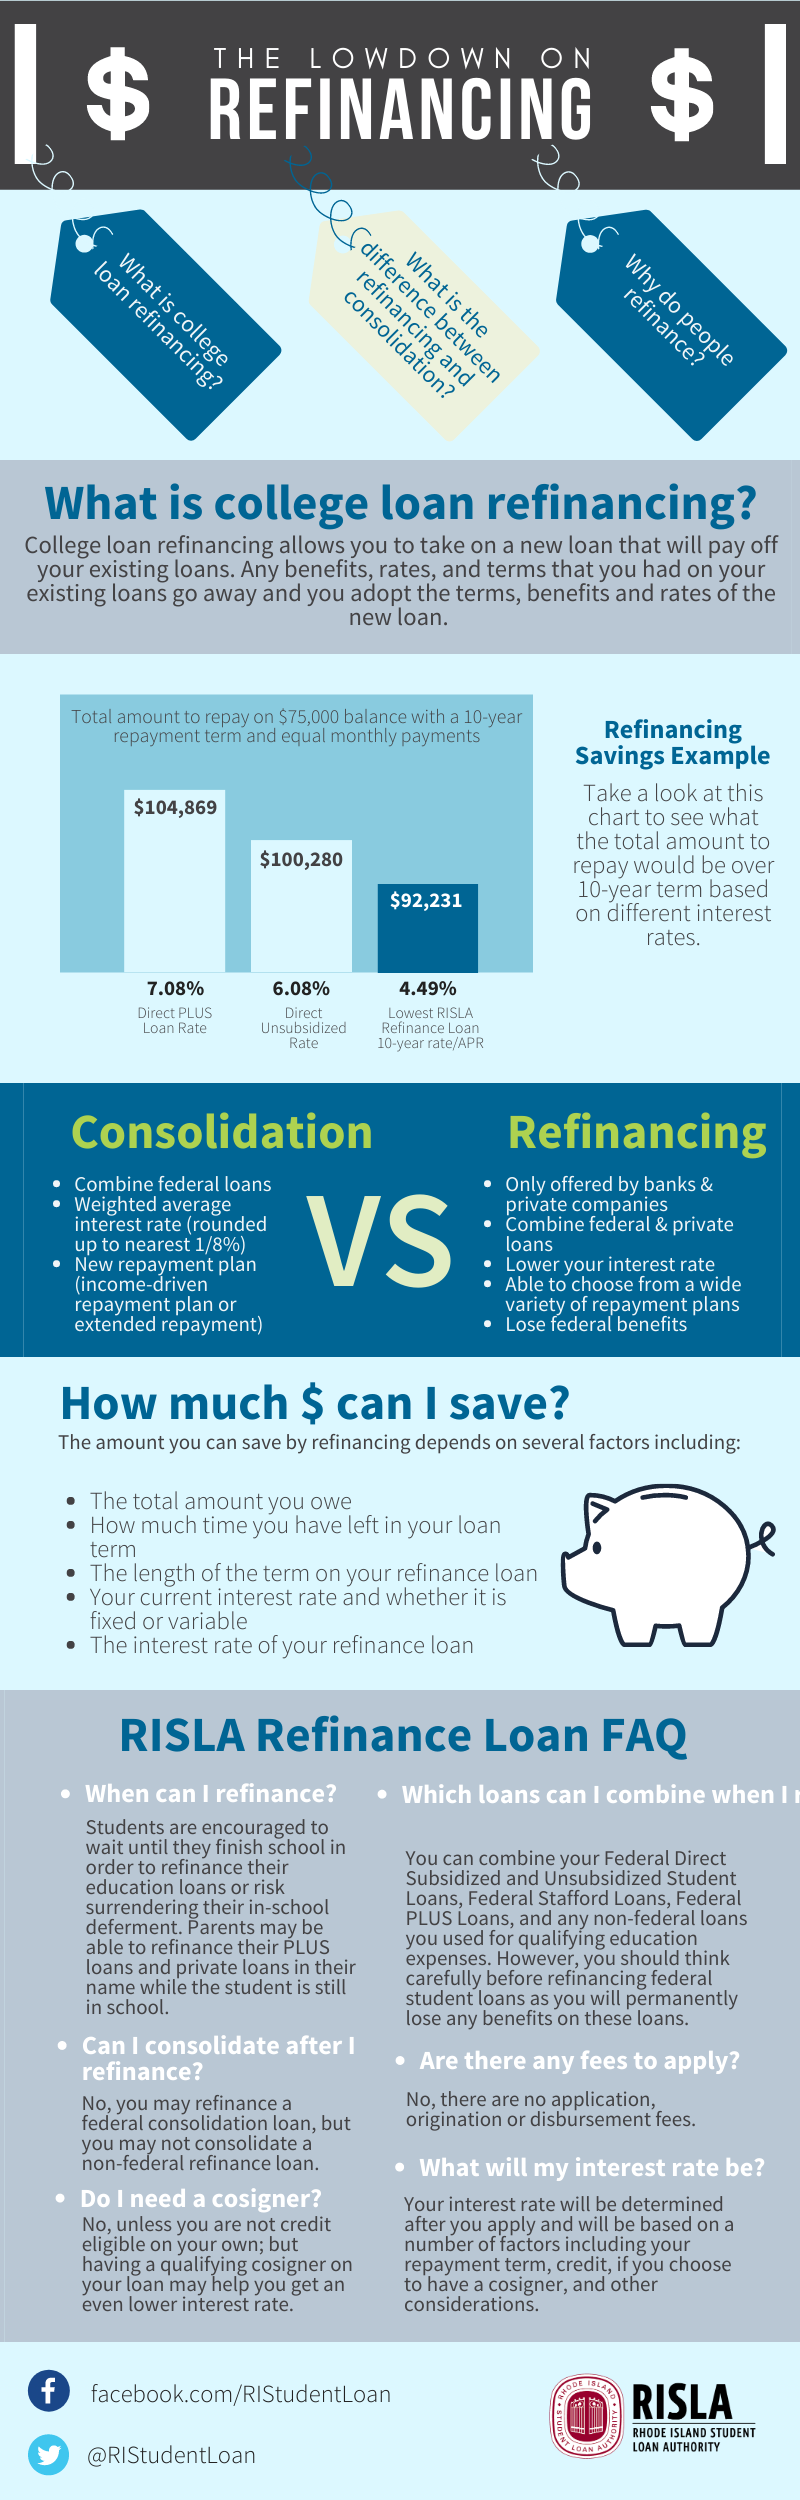 The Lowdown on Student Loan Refinancing [Infographic]